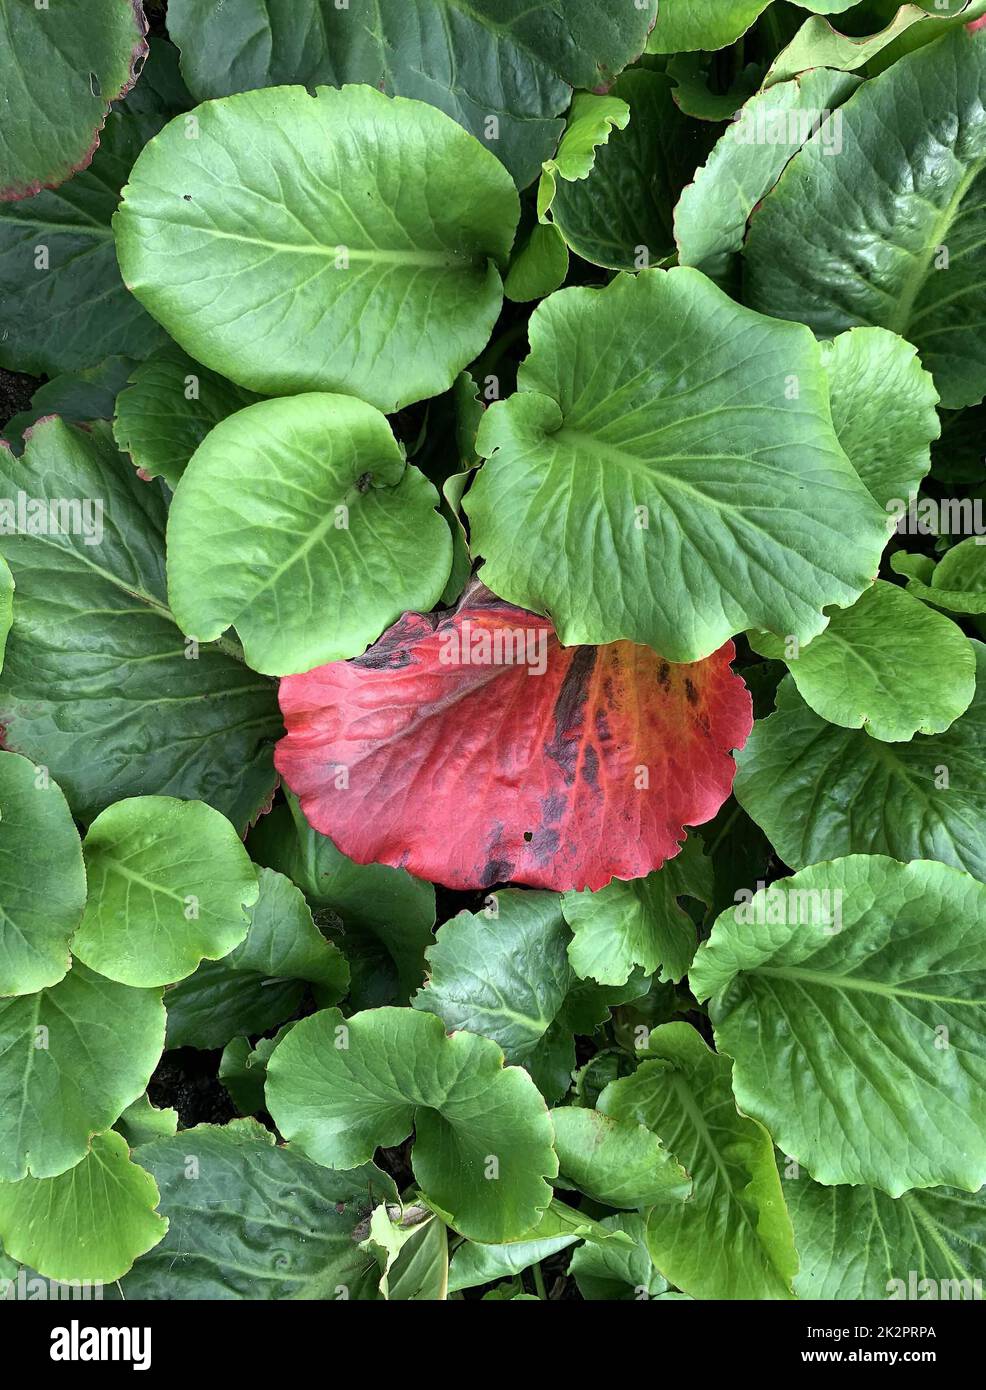 Close up of the evergreen perennial ground covering plant Bergenia cordifolia Purpurea seen in the UK in late September. Stock Photo